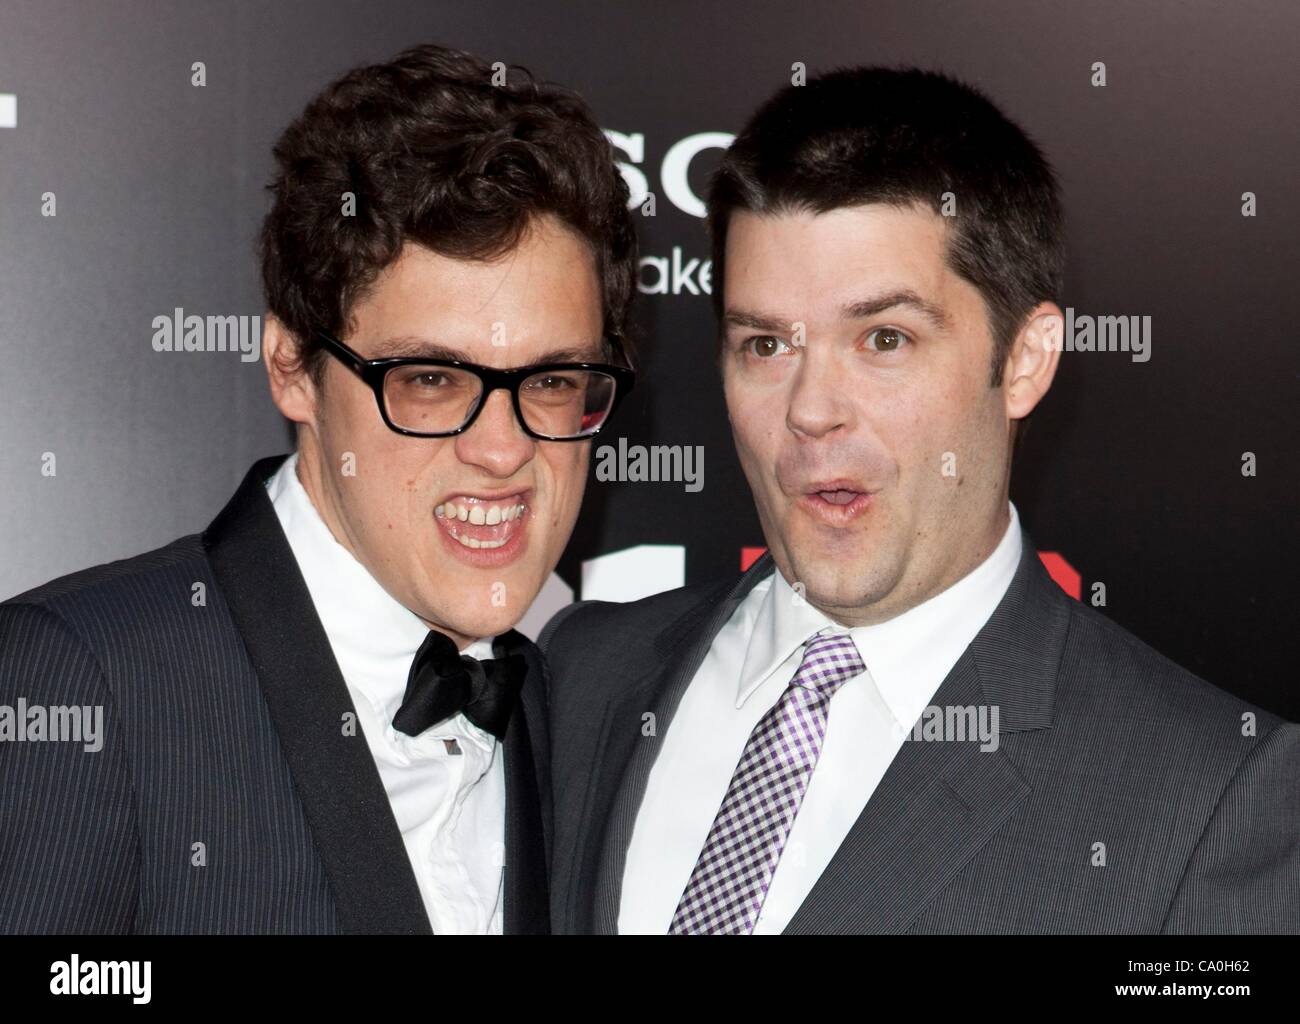 Phil Lord, Christopher Miller at arrivals for 21 JUMP STREET Premiere, Grauman's Chinese Theatre, Los Angeles, CA March 13, 2012. Photo By: Emiley Schweich/Everett Collection Stock Photo